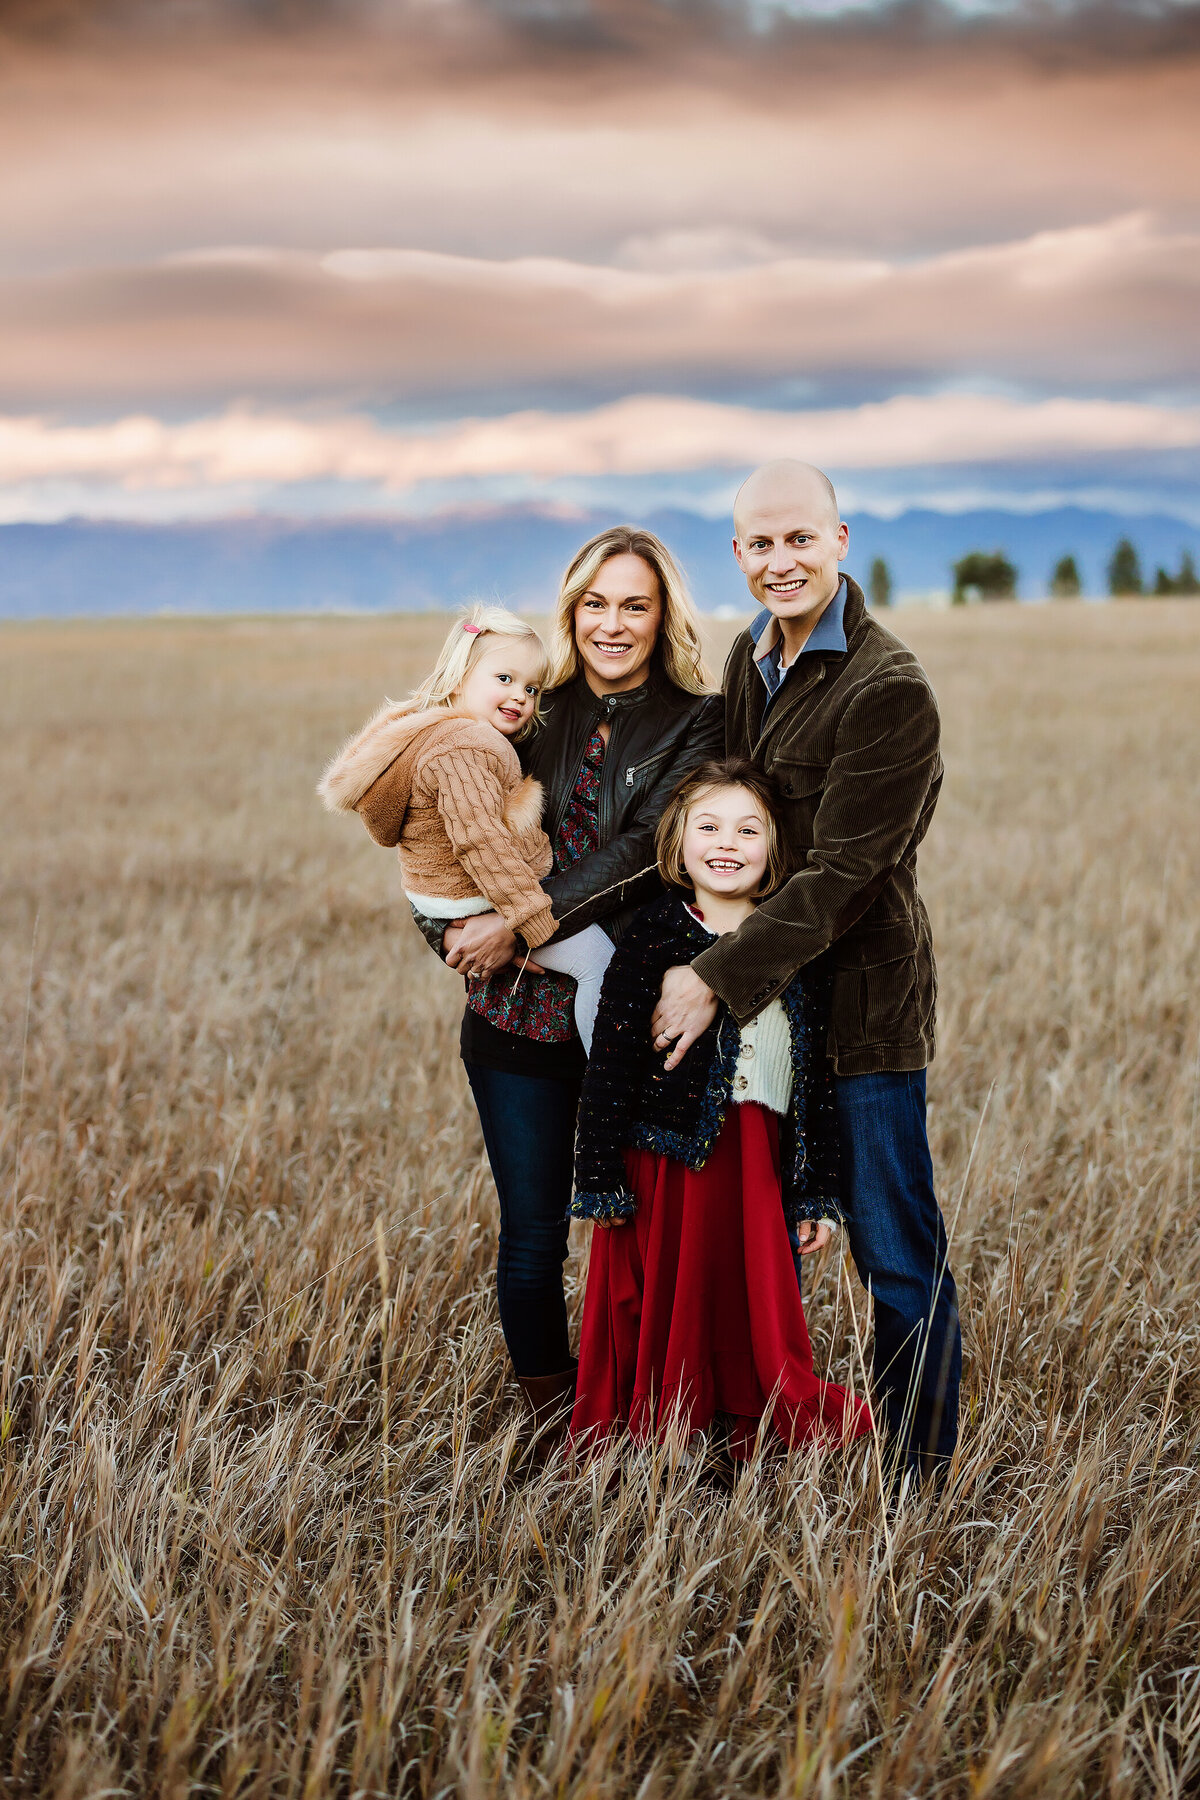 best+whitefishl+family+photographer+_+valerie+clement+photography+_+maternity+_+family+_+baby+_+child+_+photography+studio+_+outdoor+photo+session+kalispell+montana